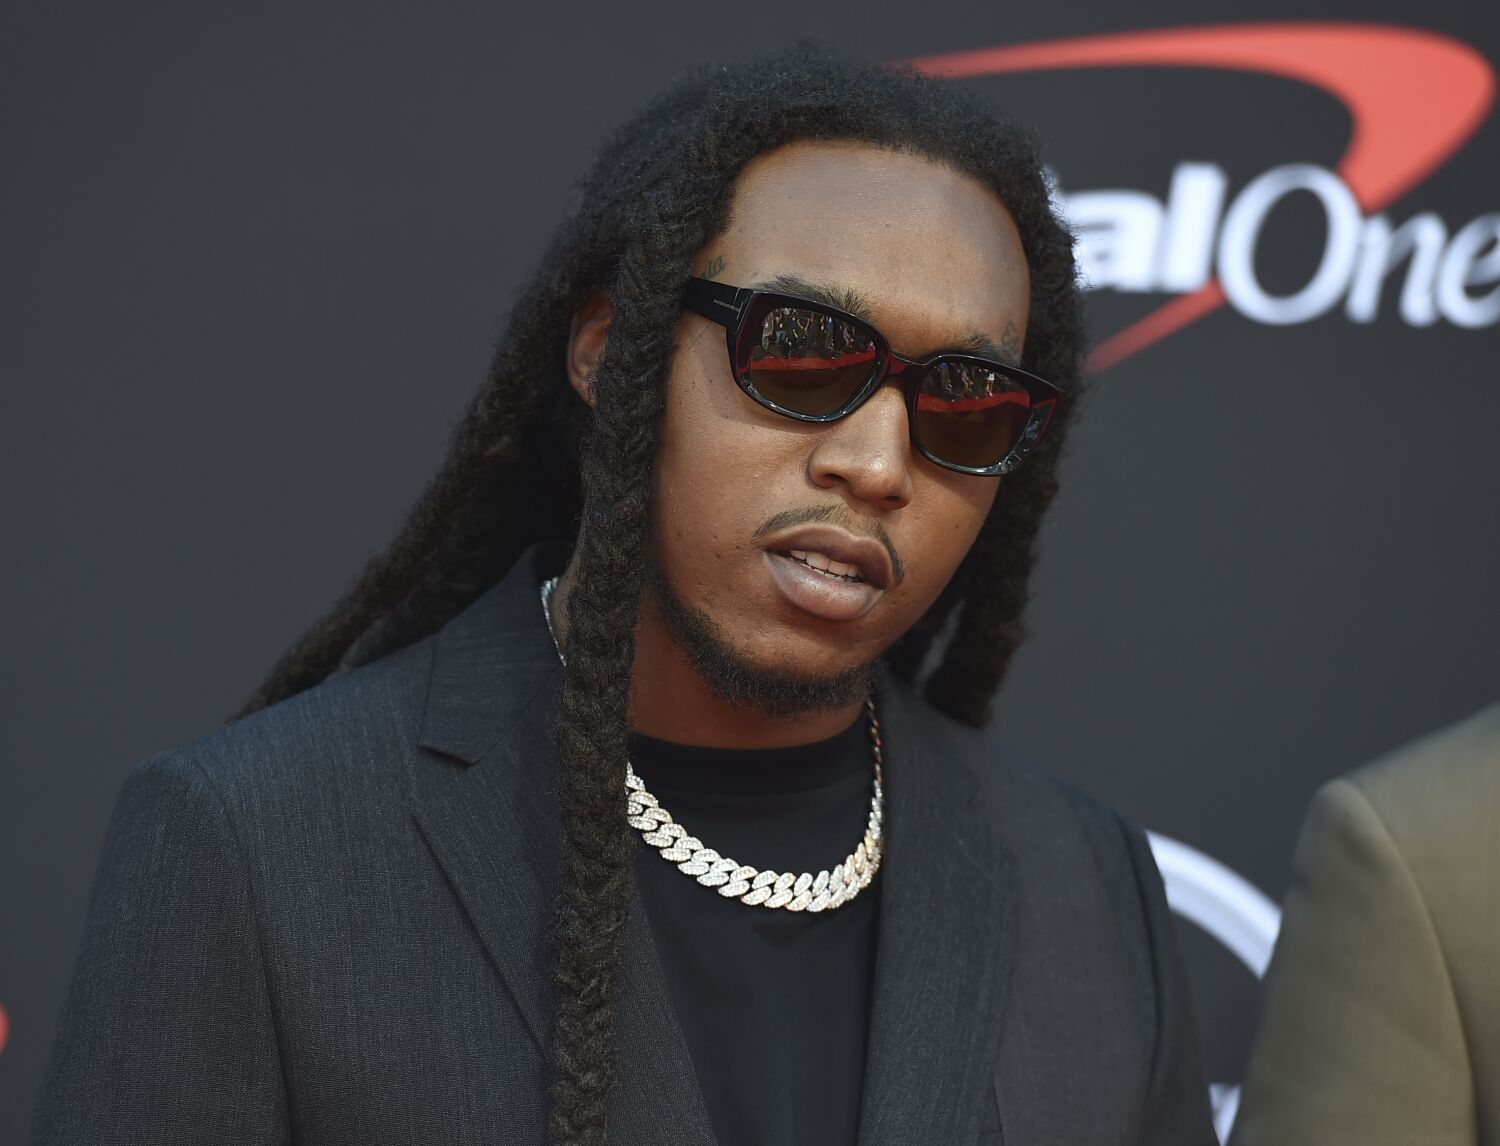 Suspect arrested in Houston in shooting death of Migos rapper Takeoff